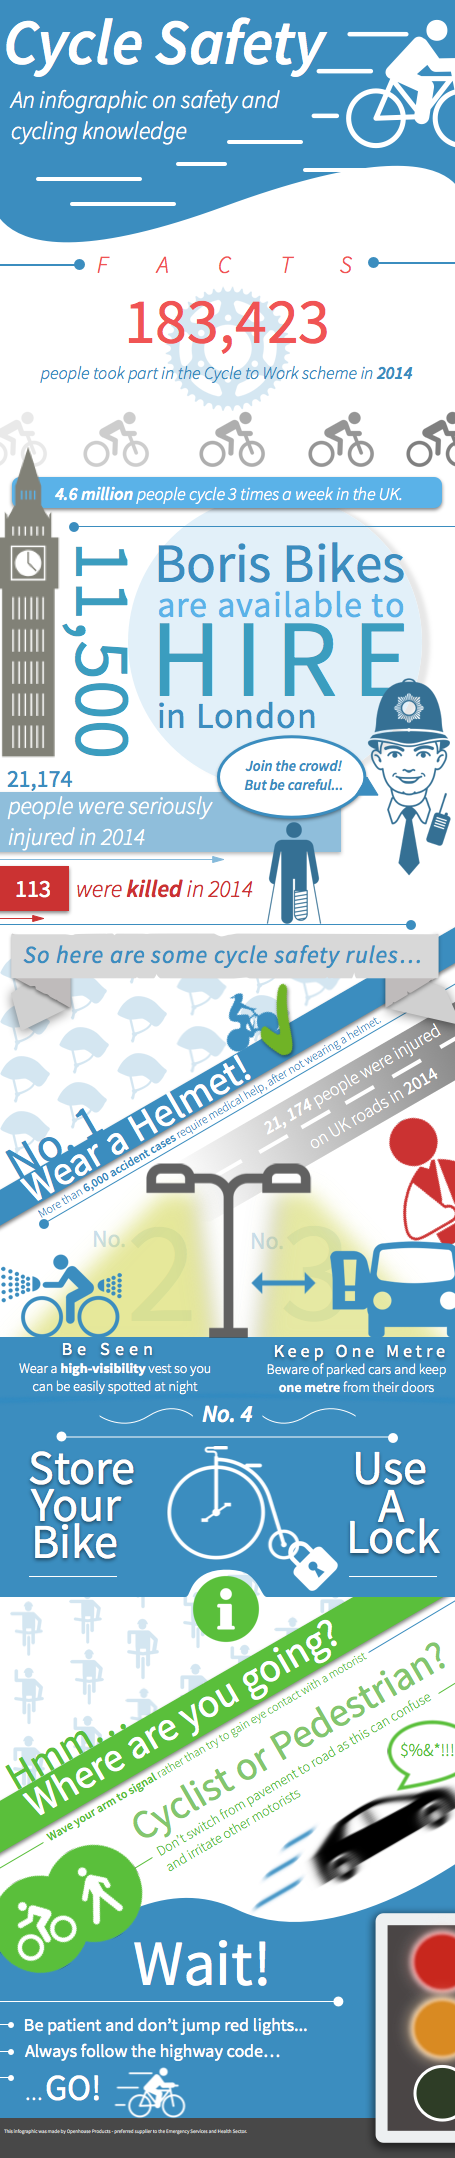 Cycle Safety -OH final